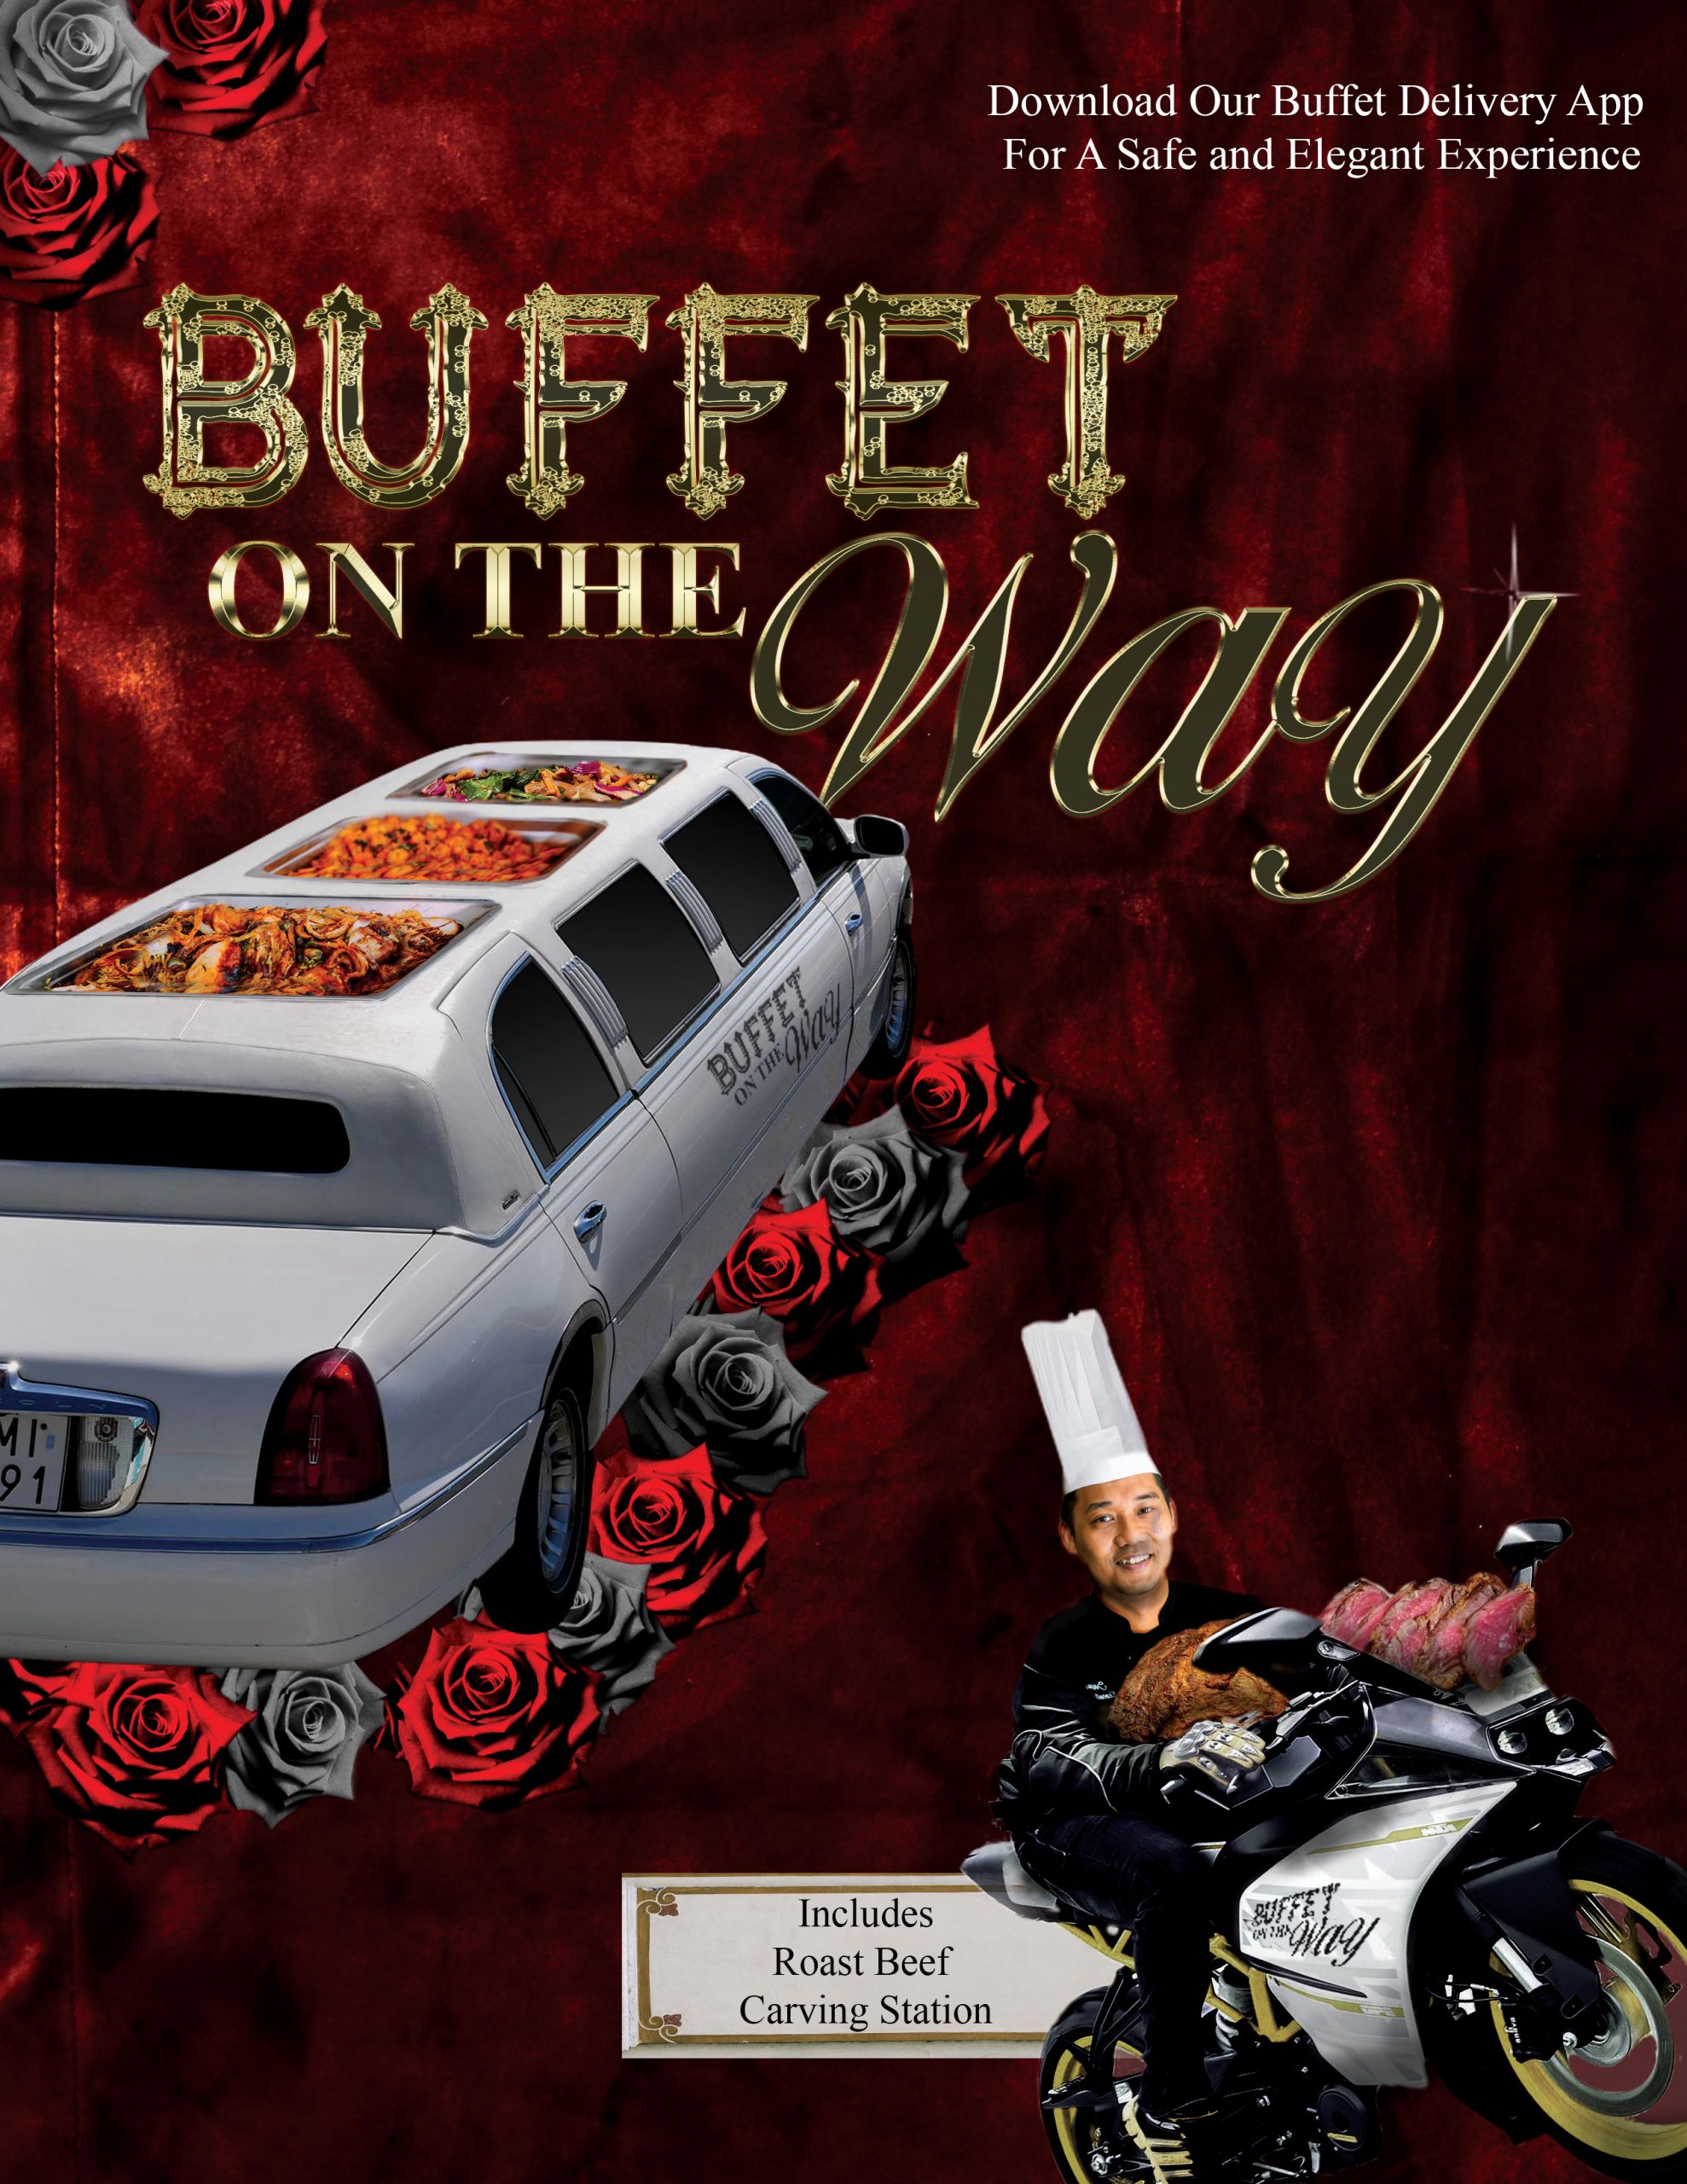 Buffet on the way